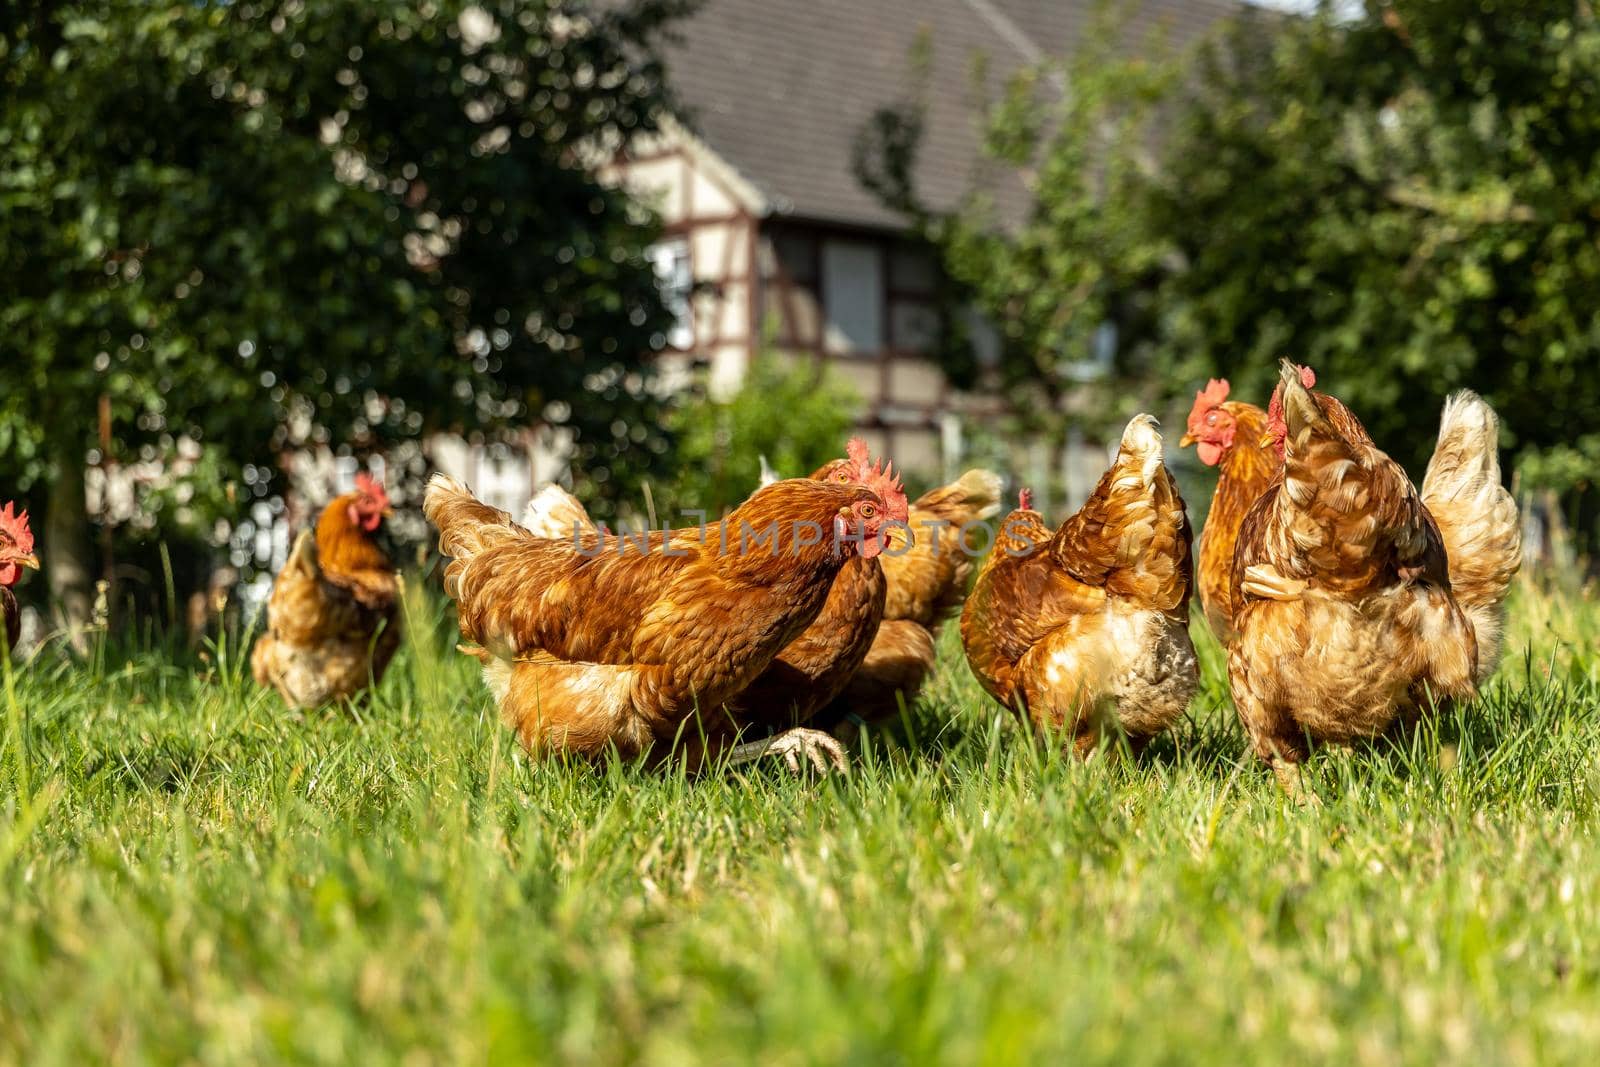 Free range organic chickens poultry in a country farm, germany by bettercallcurry